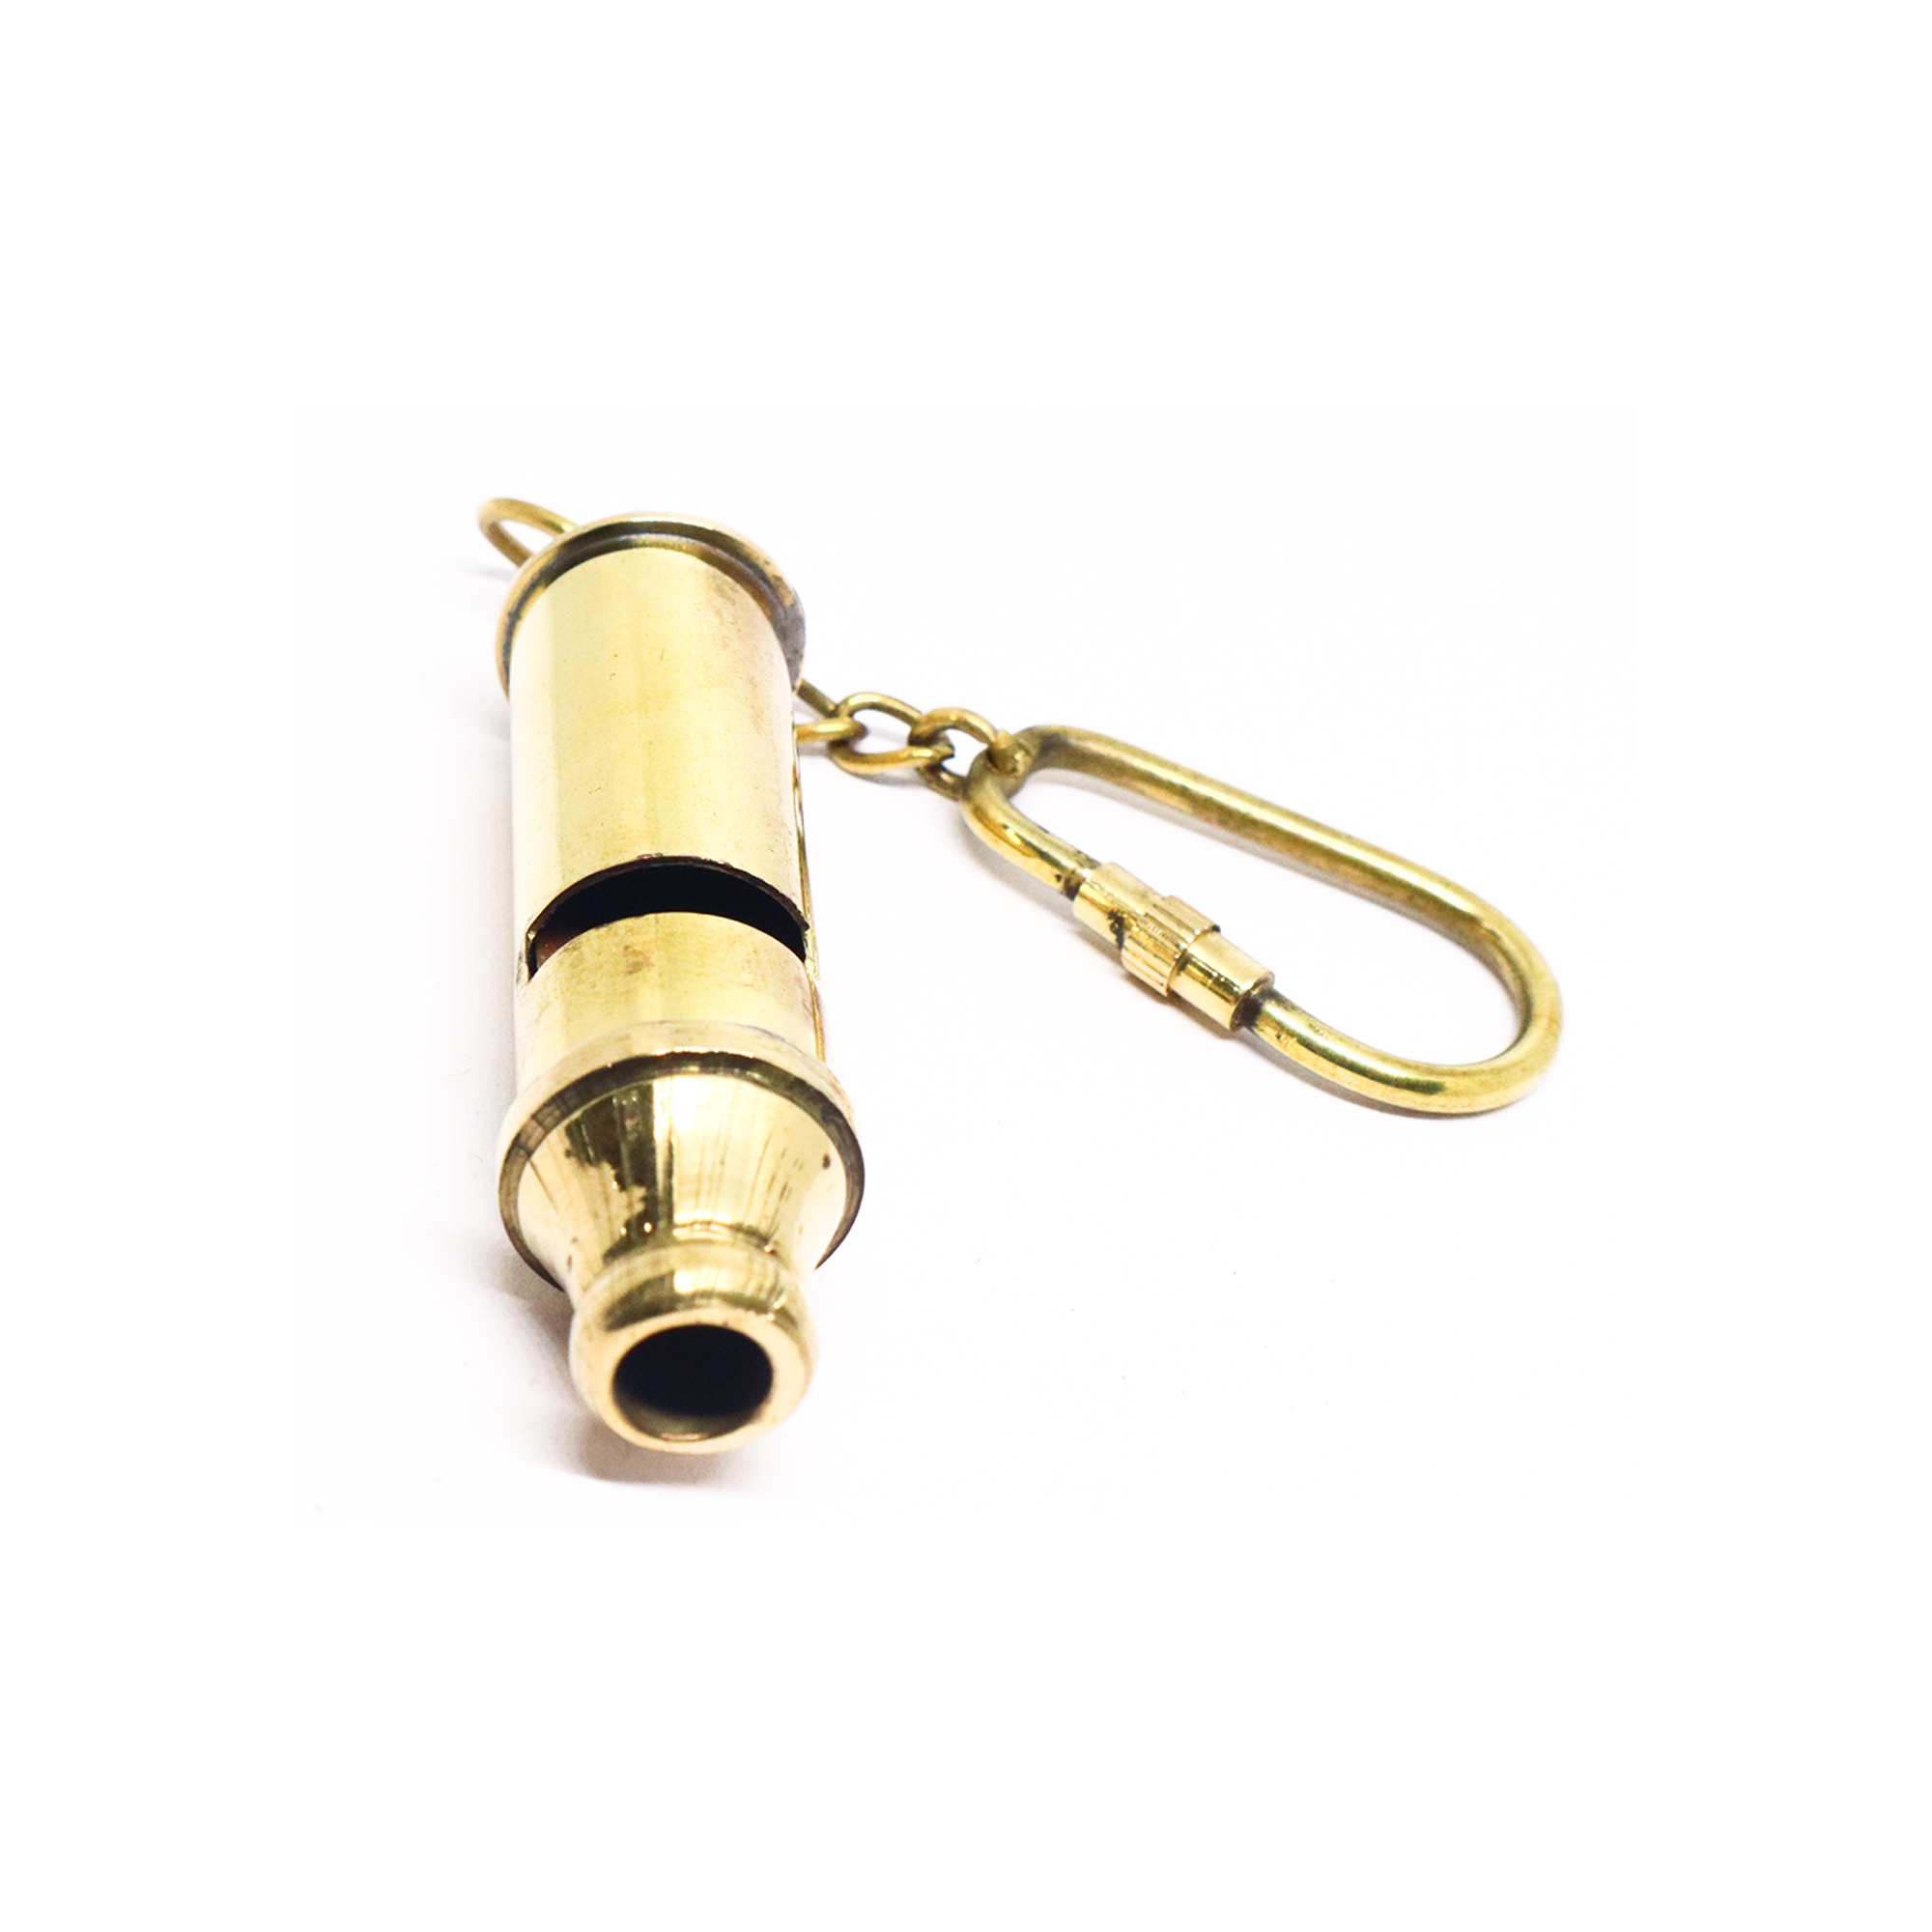 Whistle Key Chain Compact Design